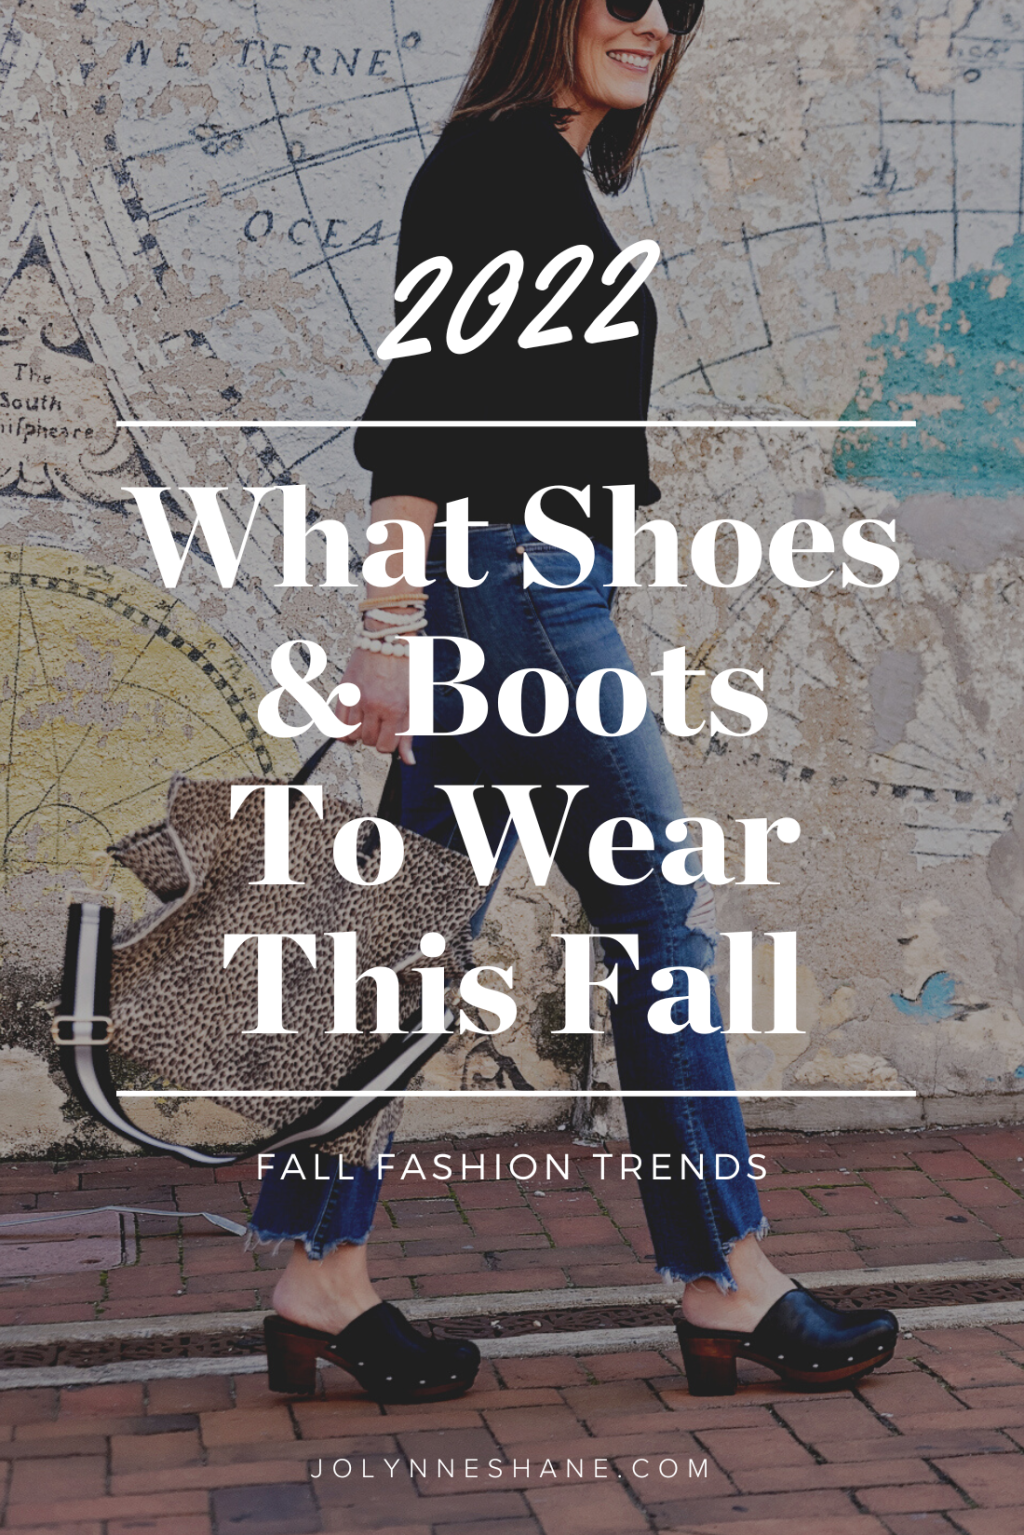 shoes on trend for fall 2022 - Fall  Shoe Trends To Wear This Season